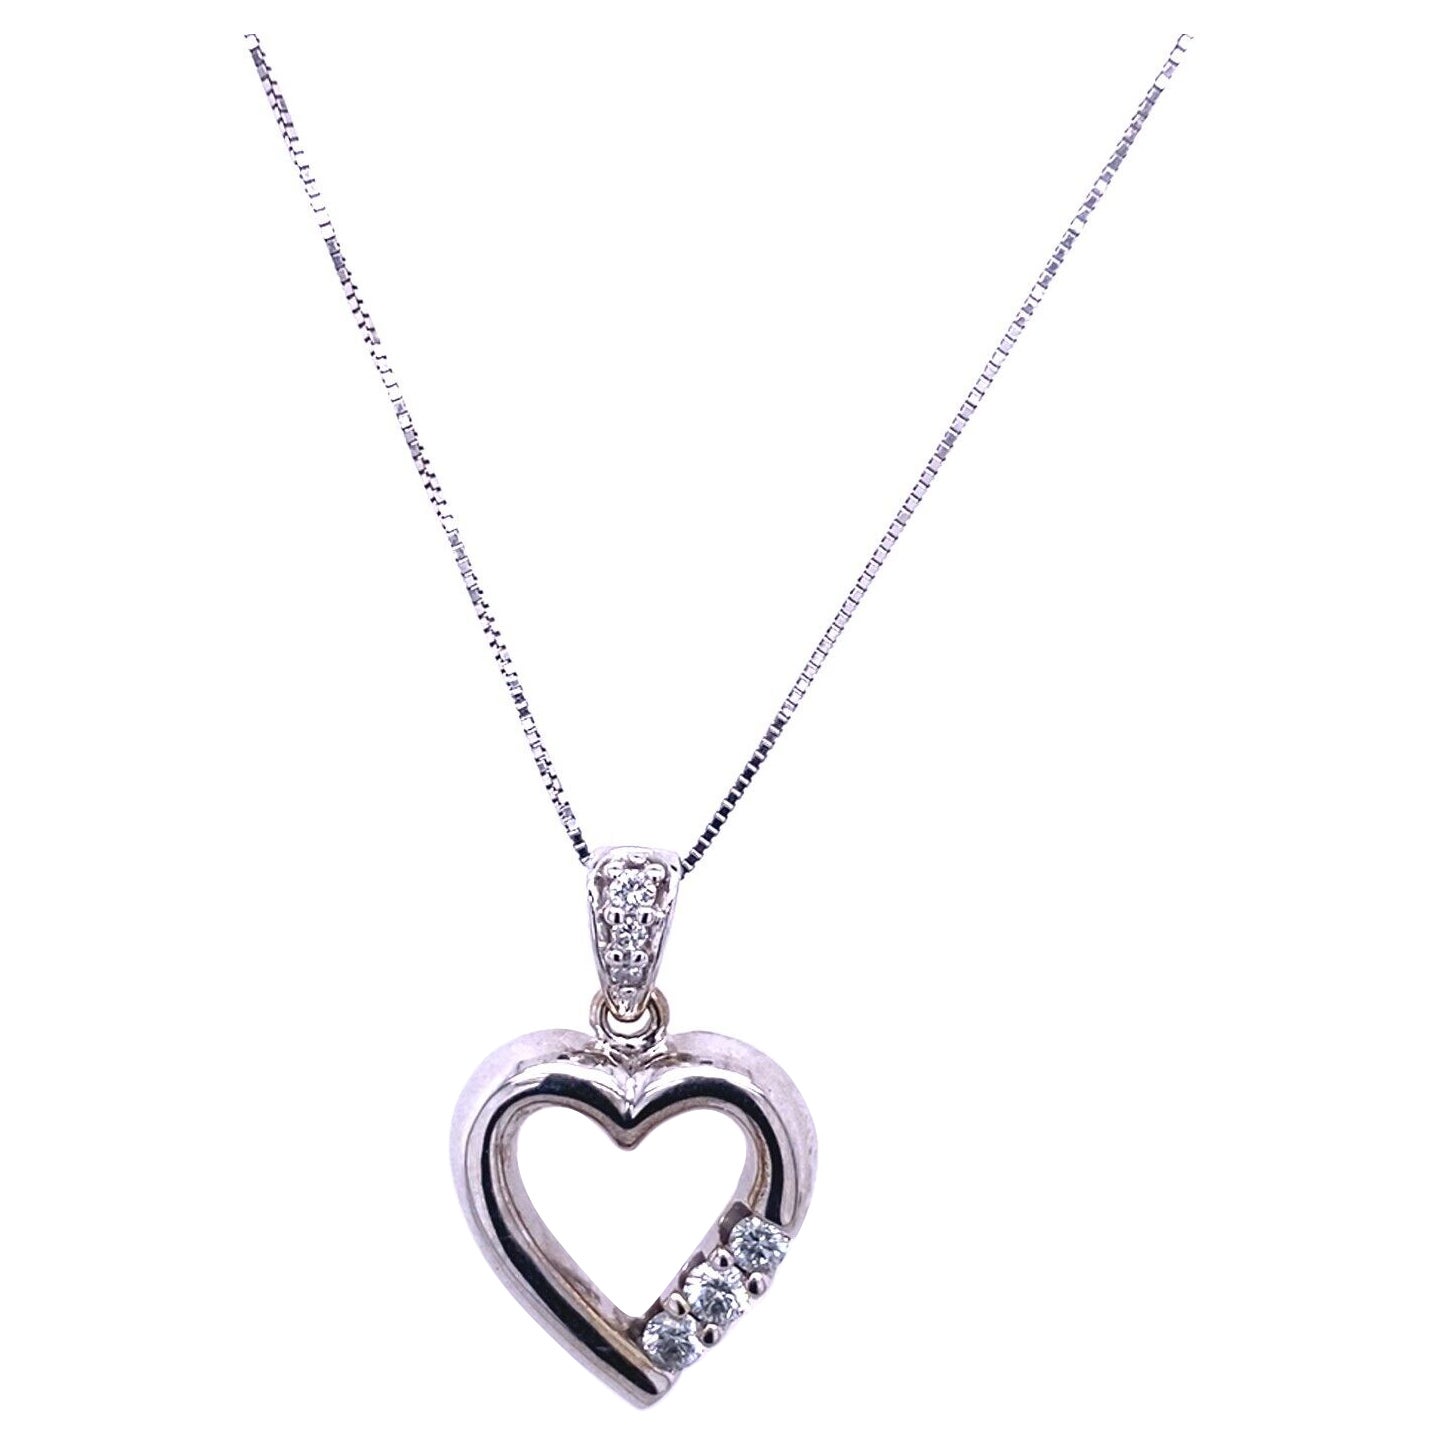 Solid 14ct White Gold Diamond Heart Pendant on White Gold Chain